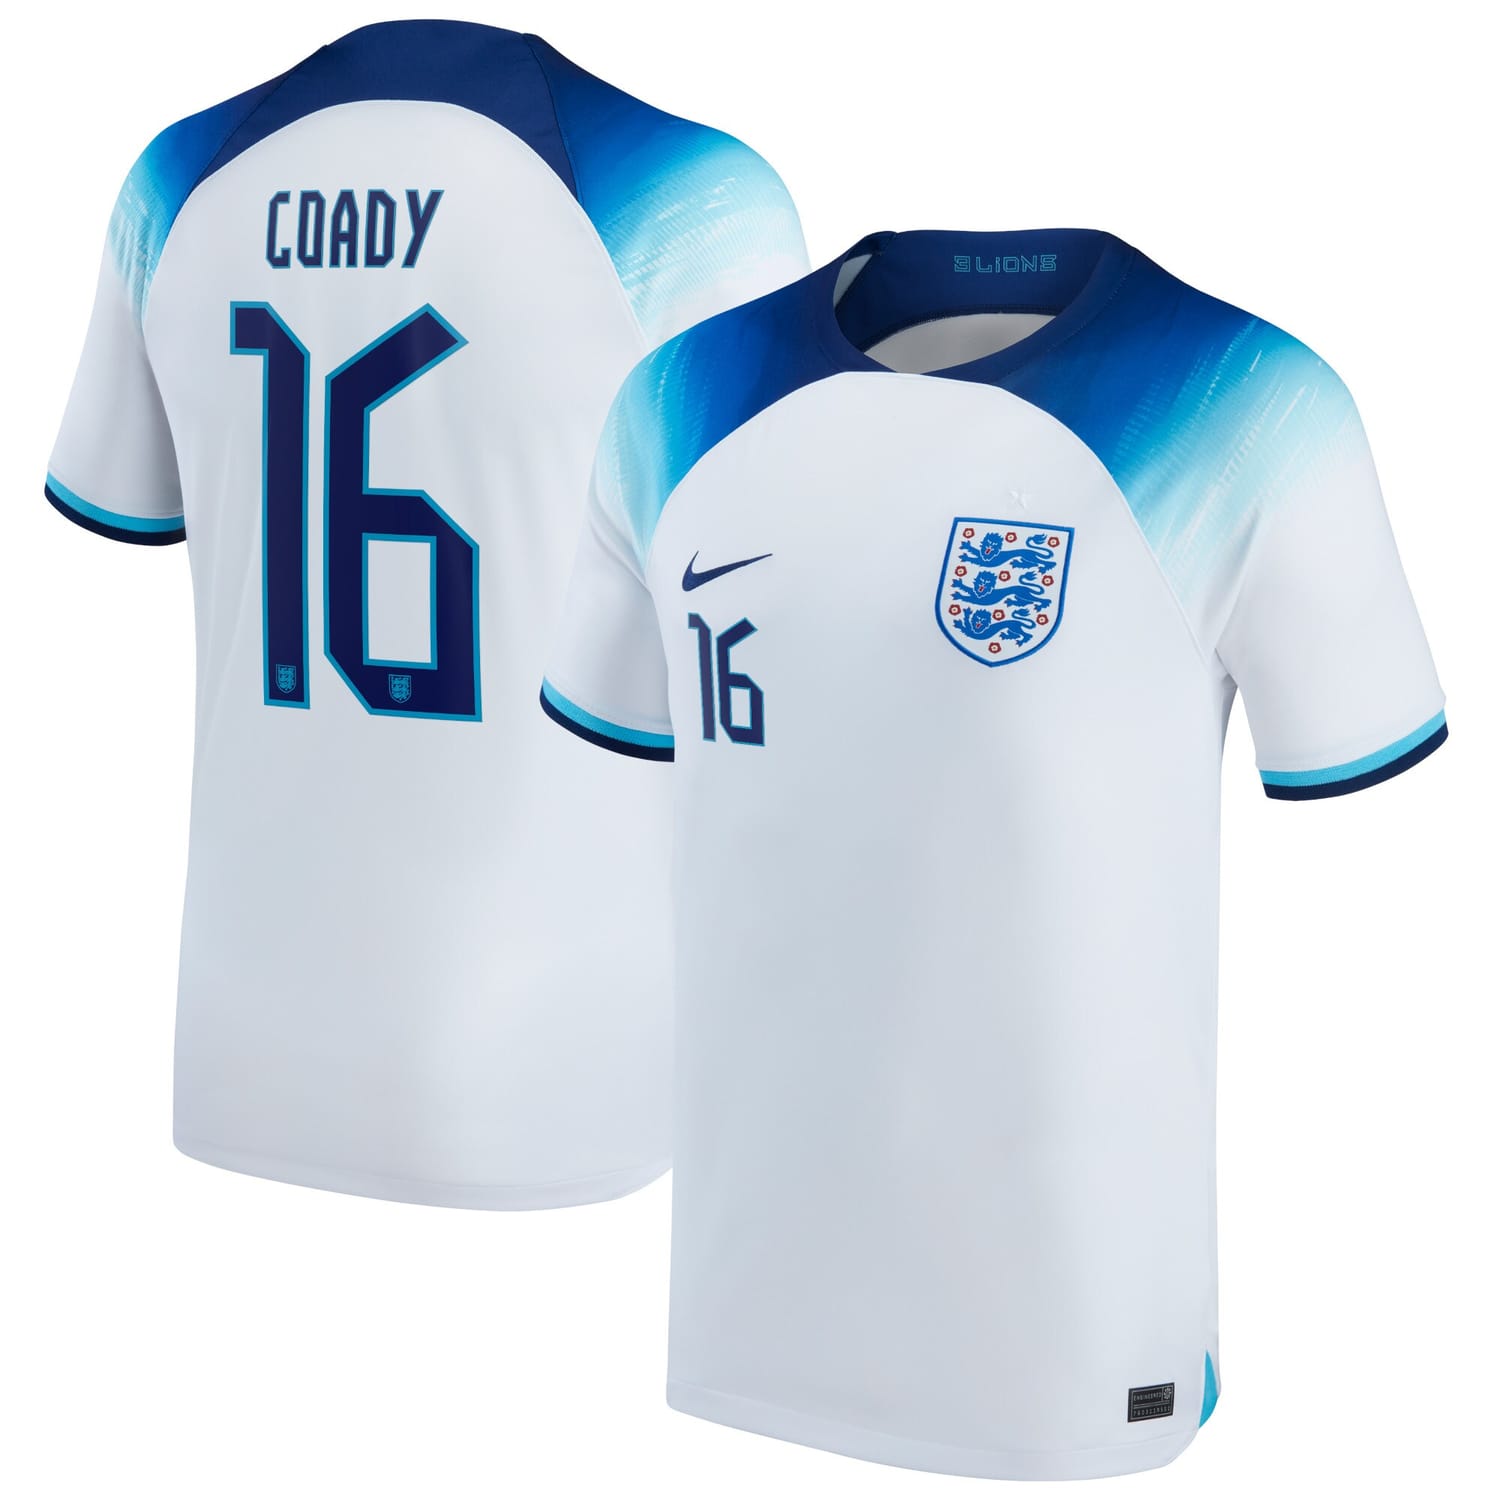 England National Team Home Jersey Shirt 2022 player Conor Coady 16 printing for Men